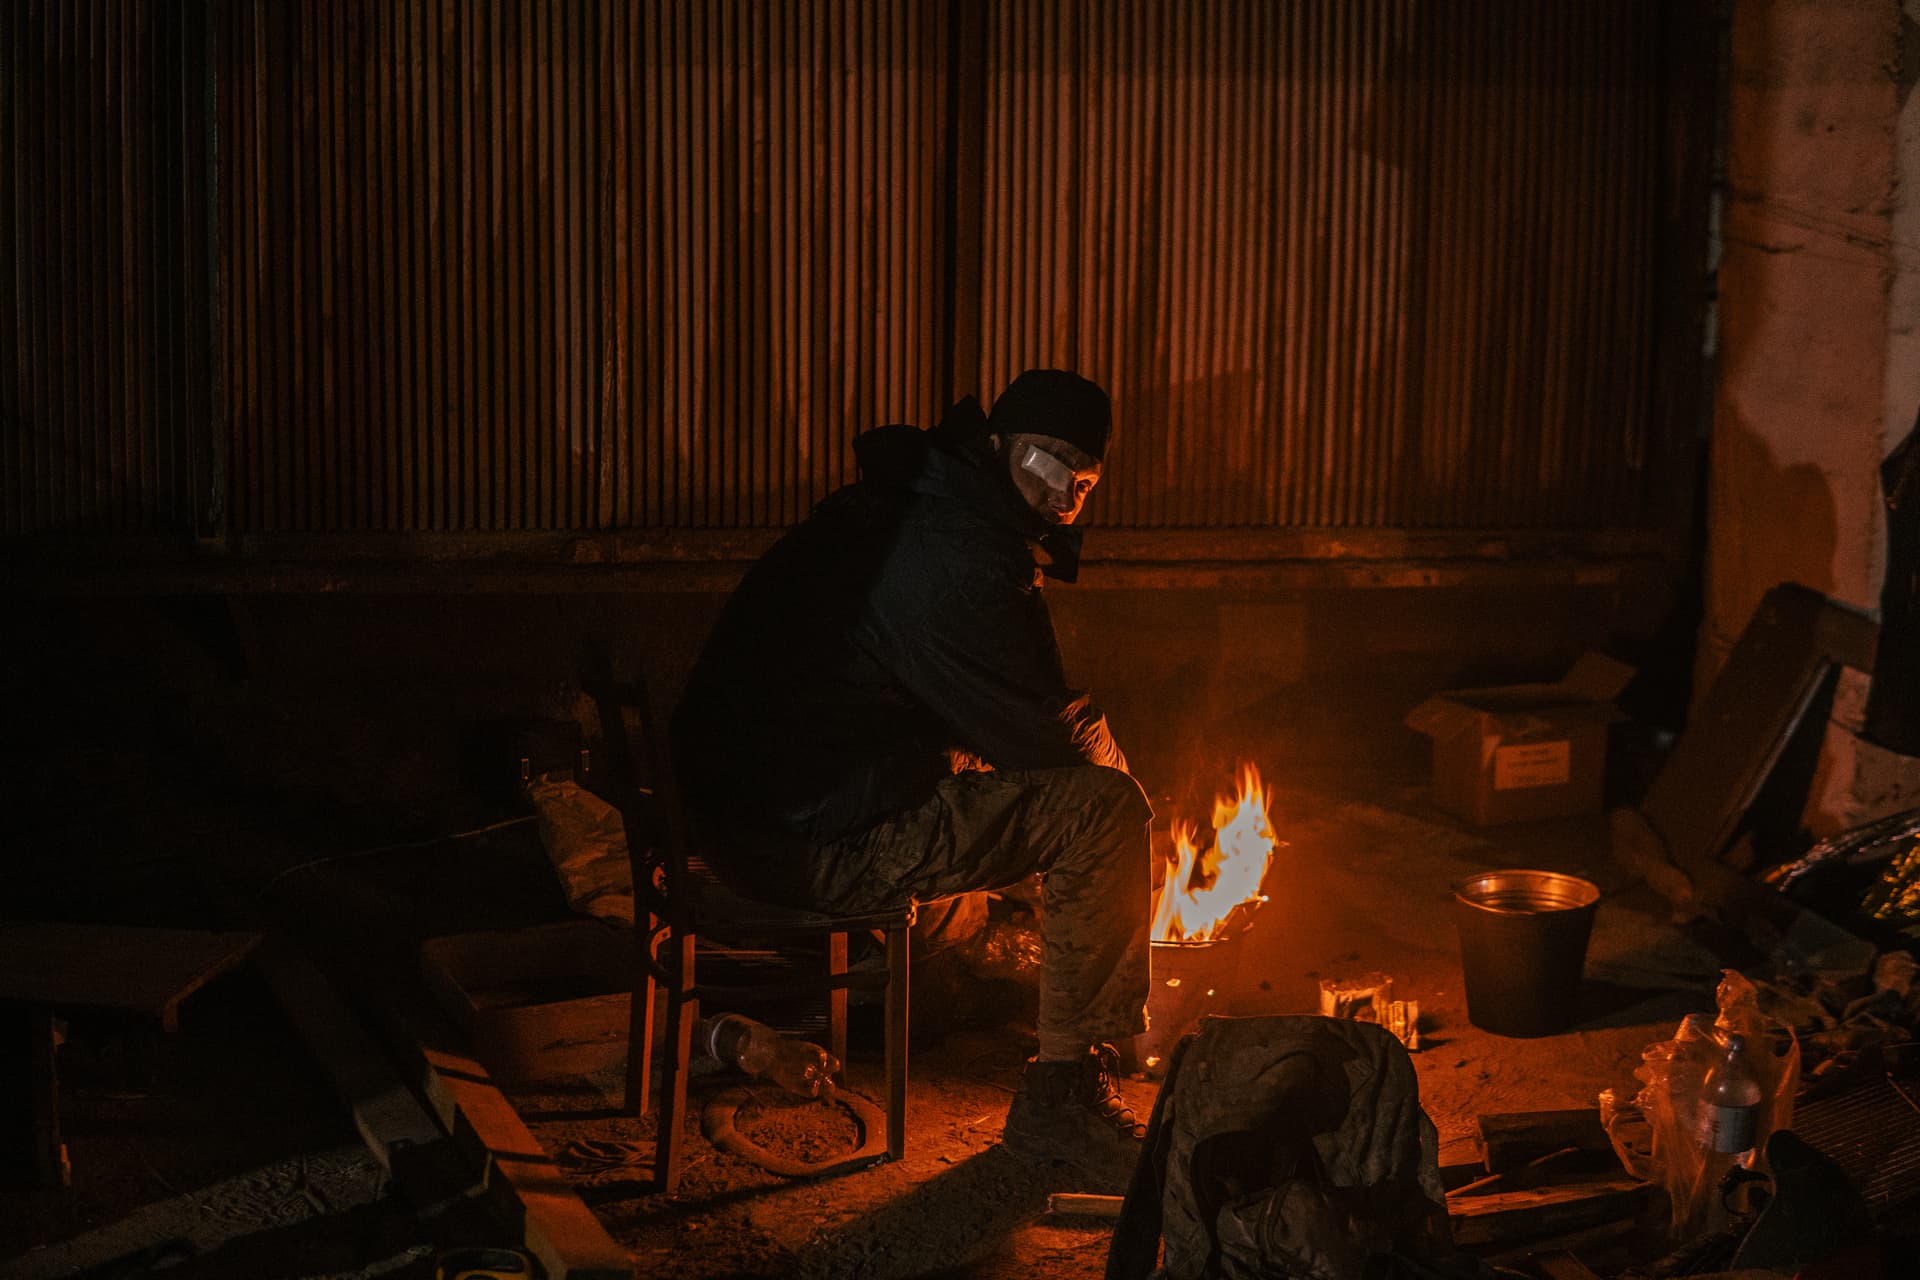 A Ukrainian soldier inside the ruined Azovstal steel plant take a rest in his shelter in Mariupol